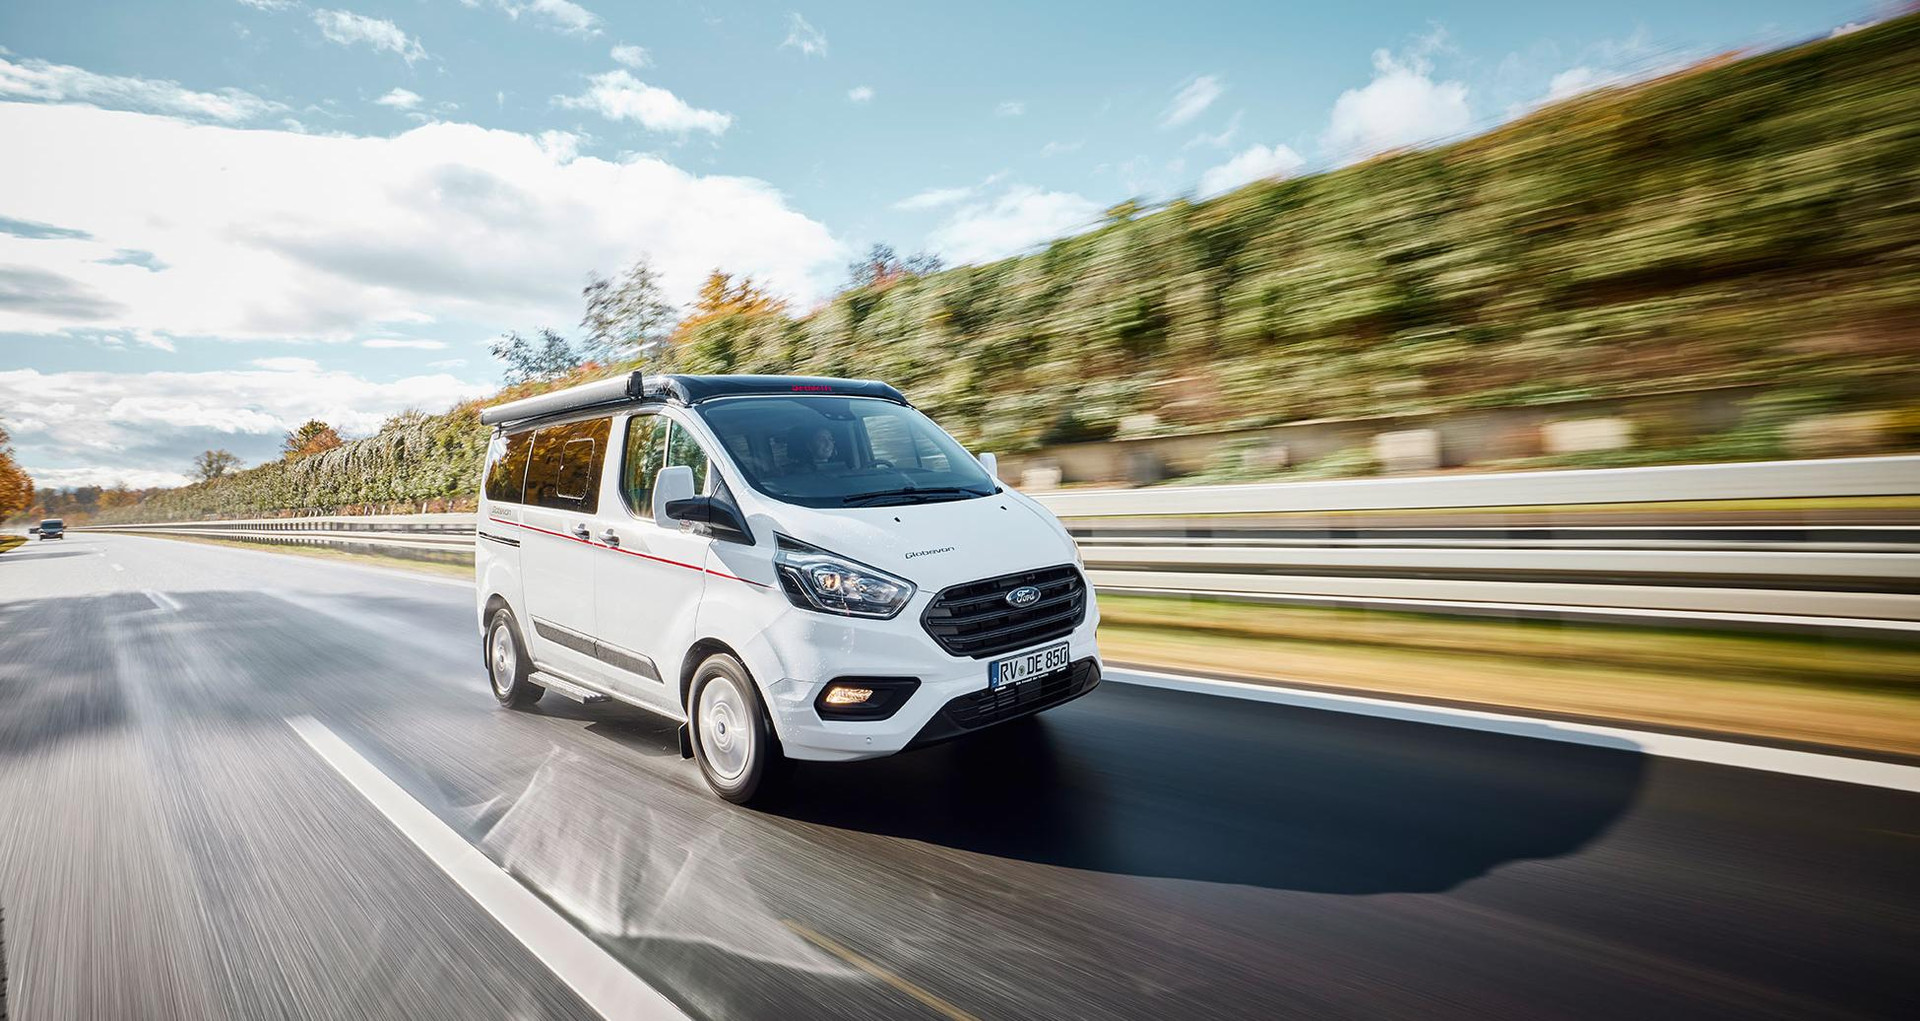 The new Globevan – a Dethleffs for every day